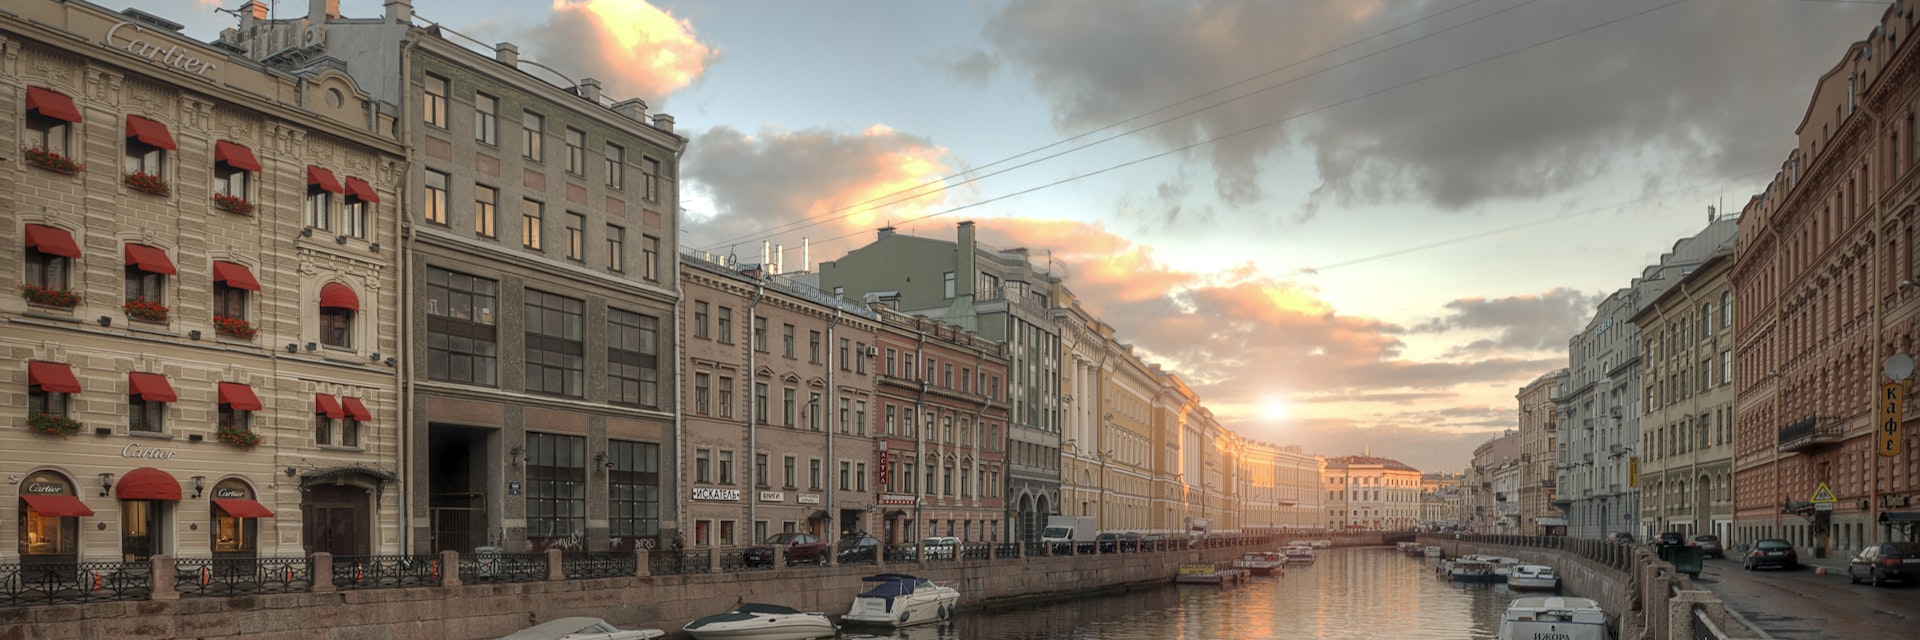 St Petersburg Travel - Lonely Planet | Russia, Europe